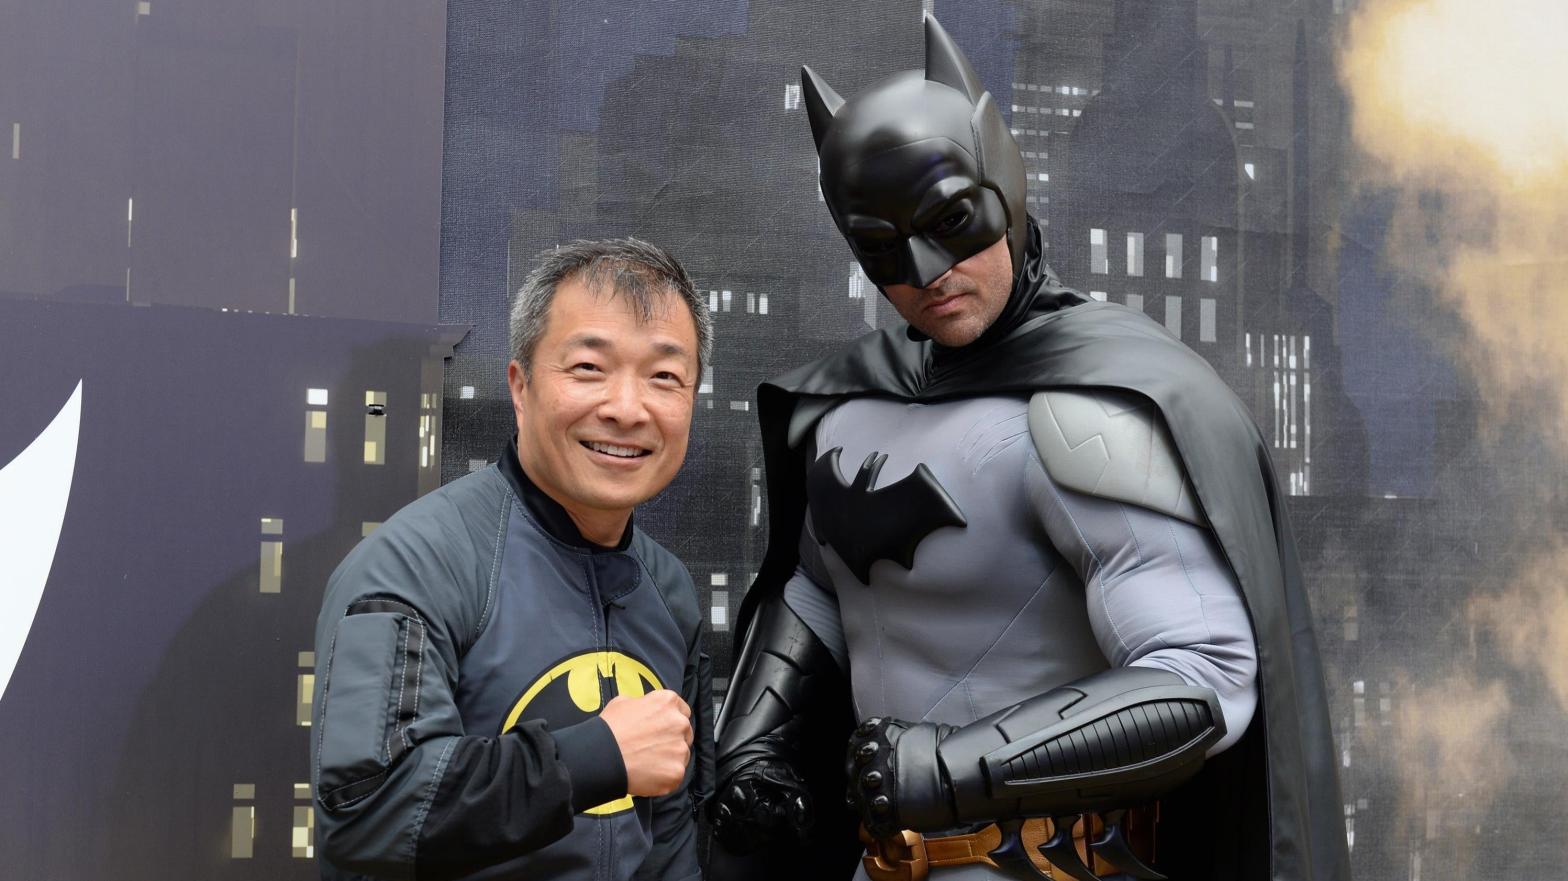 DC's Jim Lee poses with Batman during at the Comic-Con Museum on July 17, 2019 in San Diego, California. (Photo: Andrew Toth/Getty Images for DC, Getty Images)